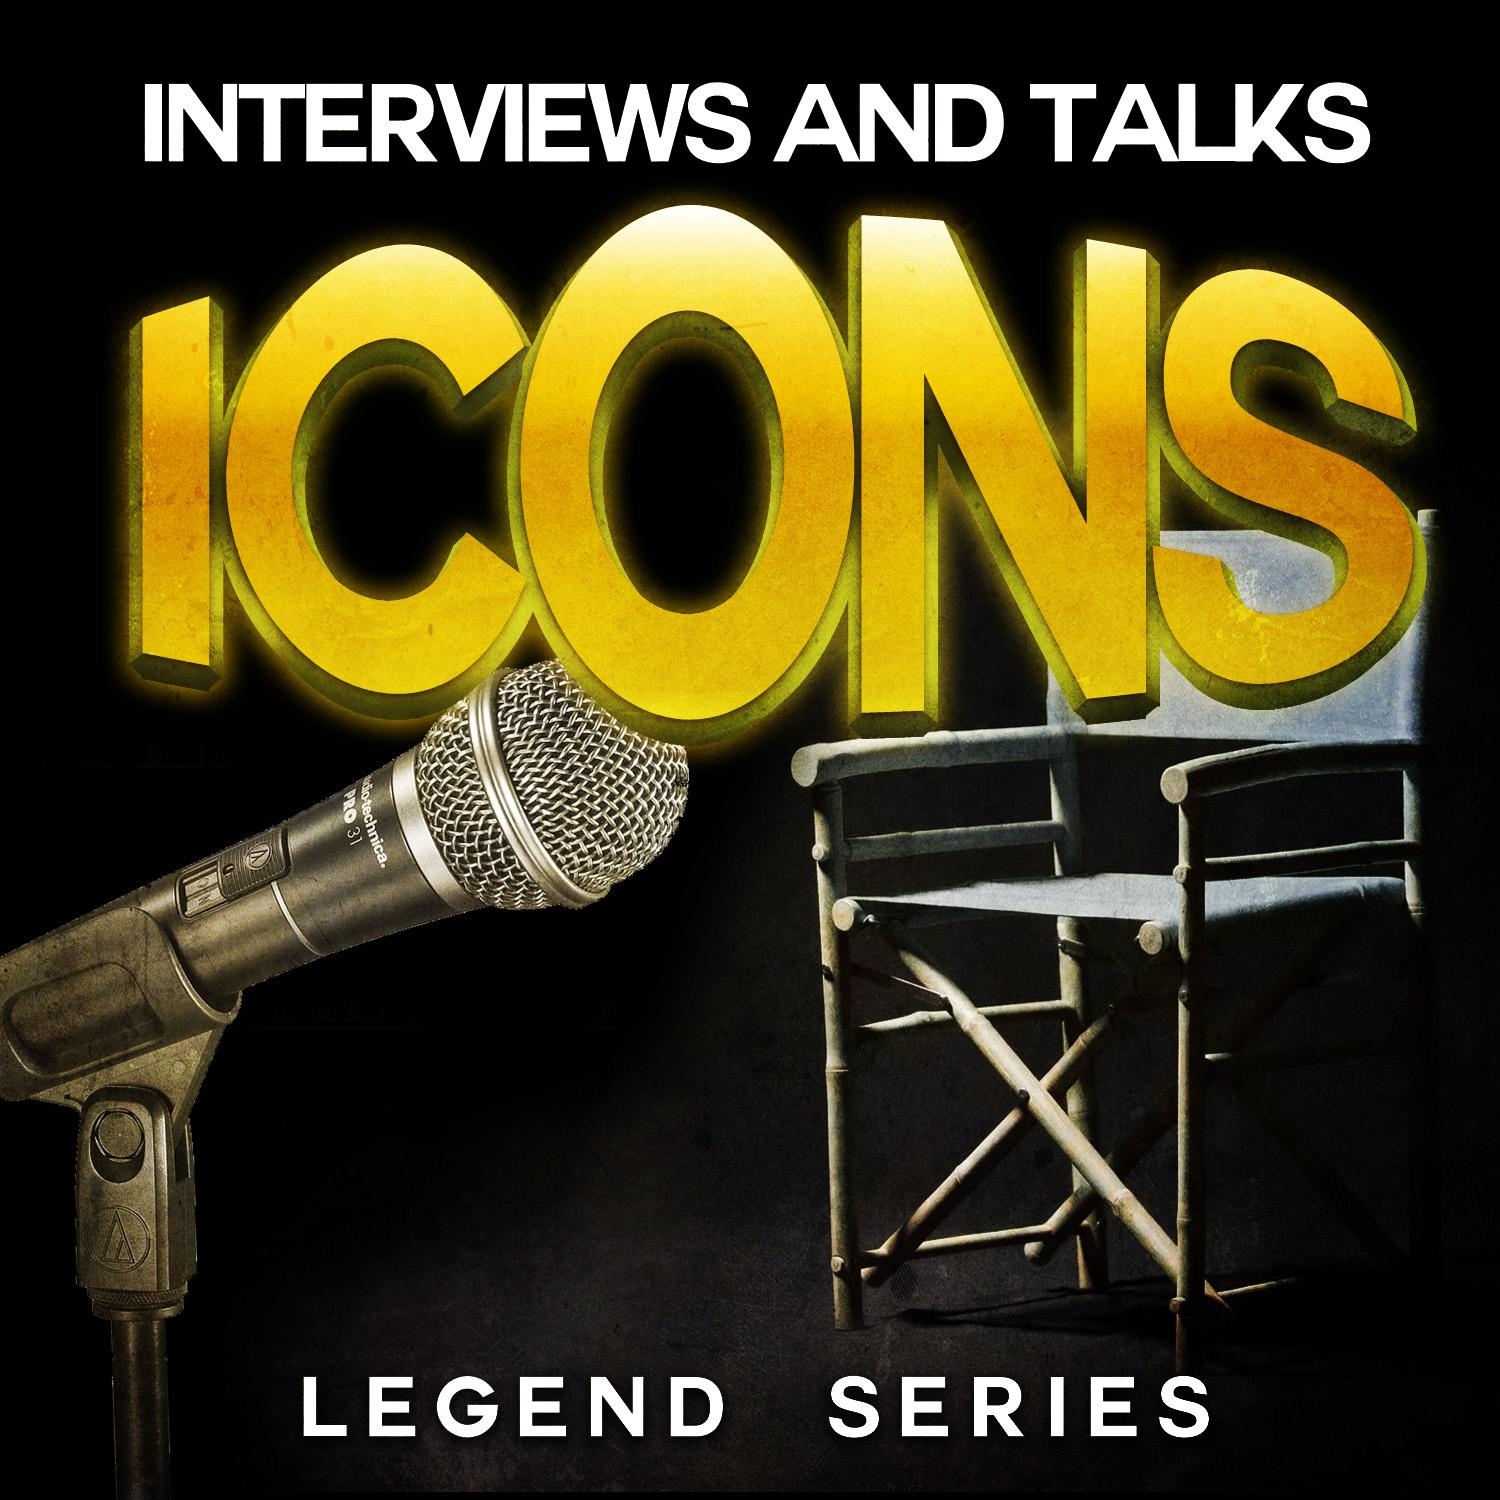 Famous Interviews and Talks from Icons - Legend Series